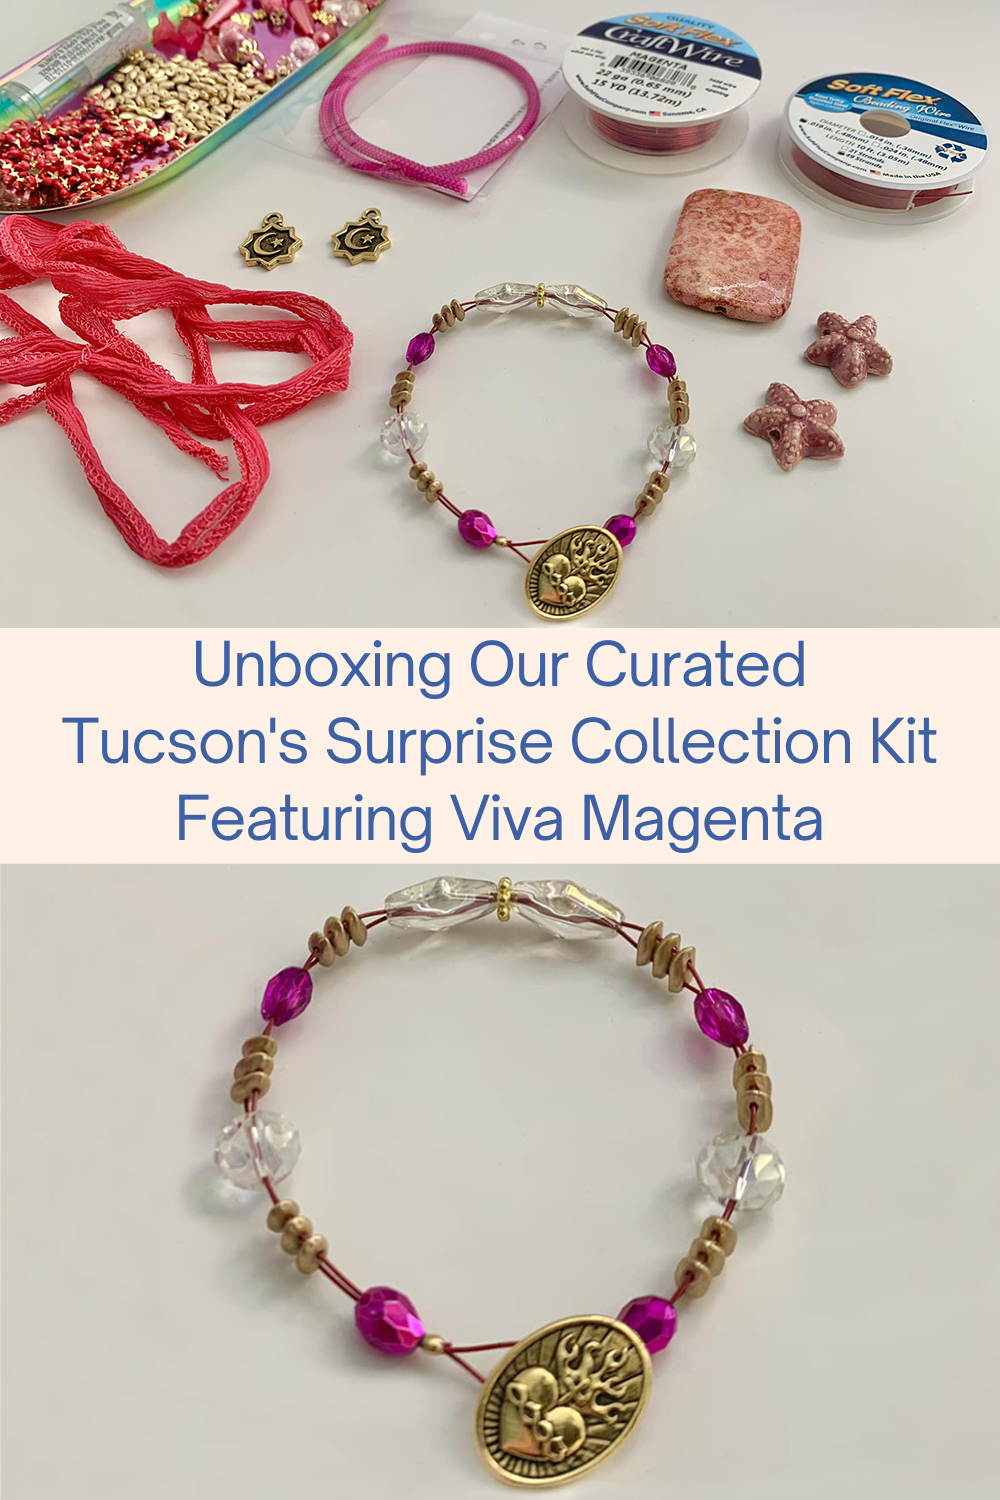 Unboxing Our Curated Tucson's Surprise Collection Kit Featuring Viva Magenta Collage